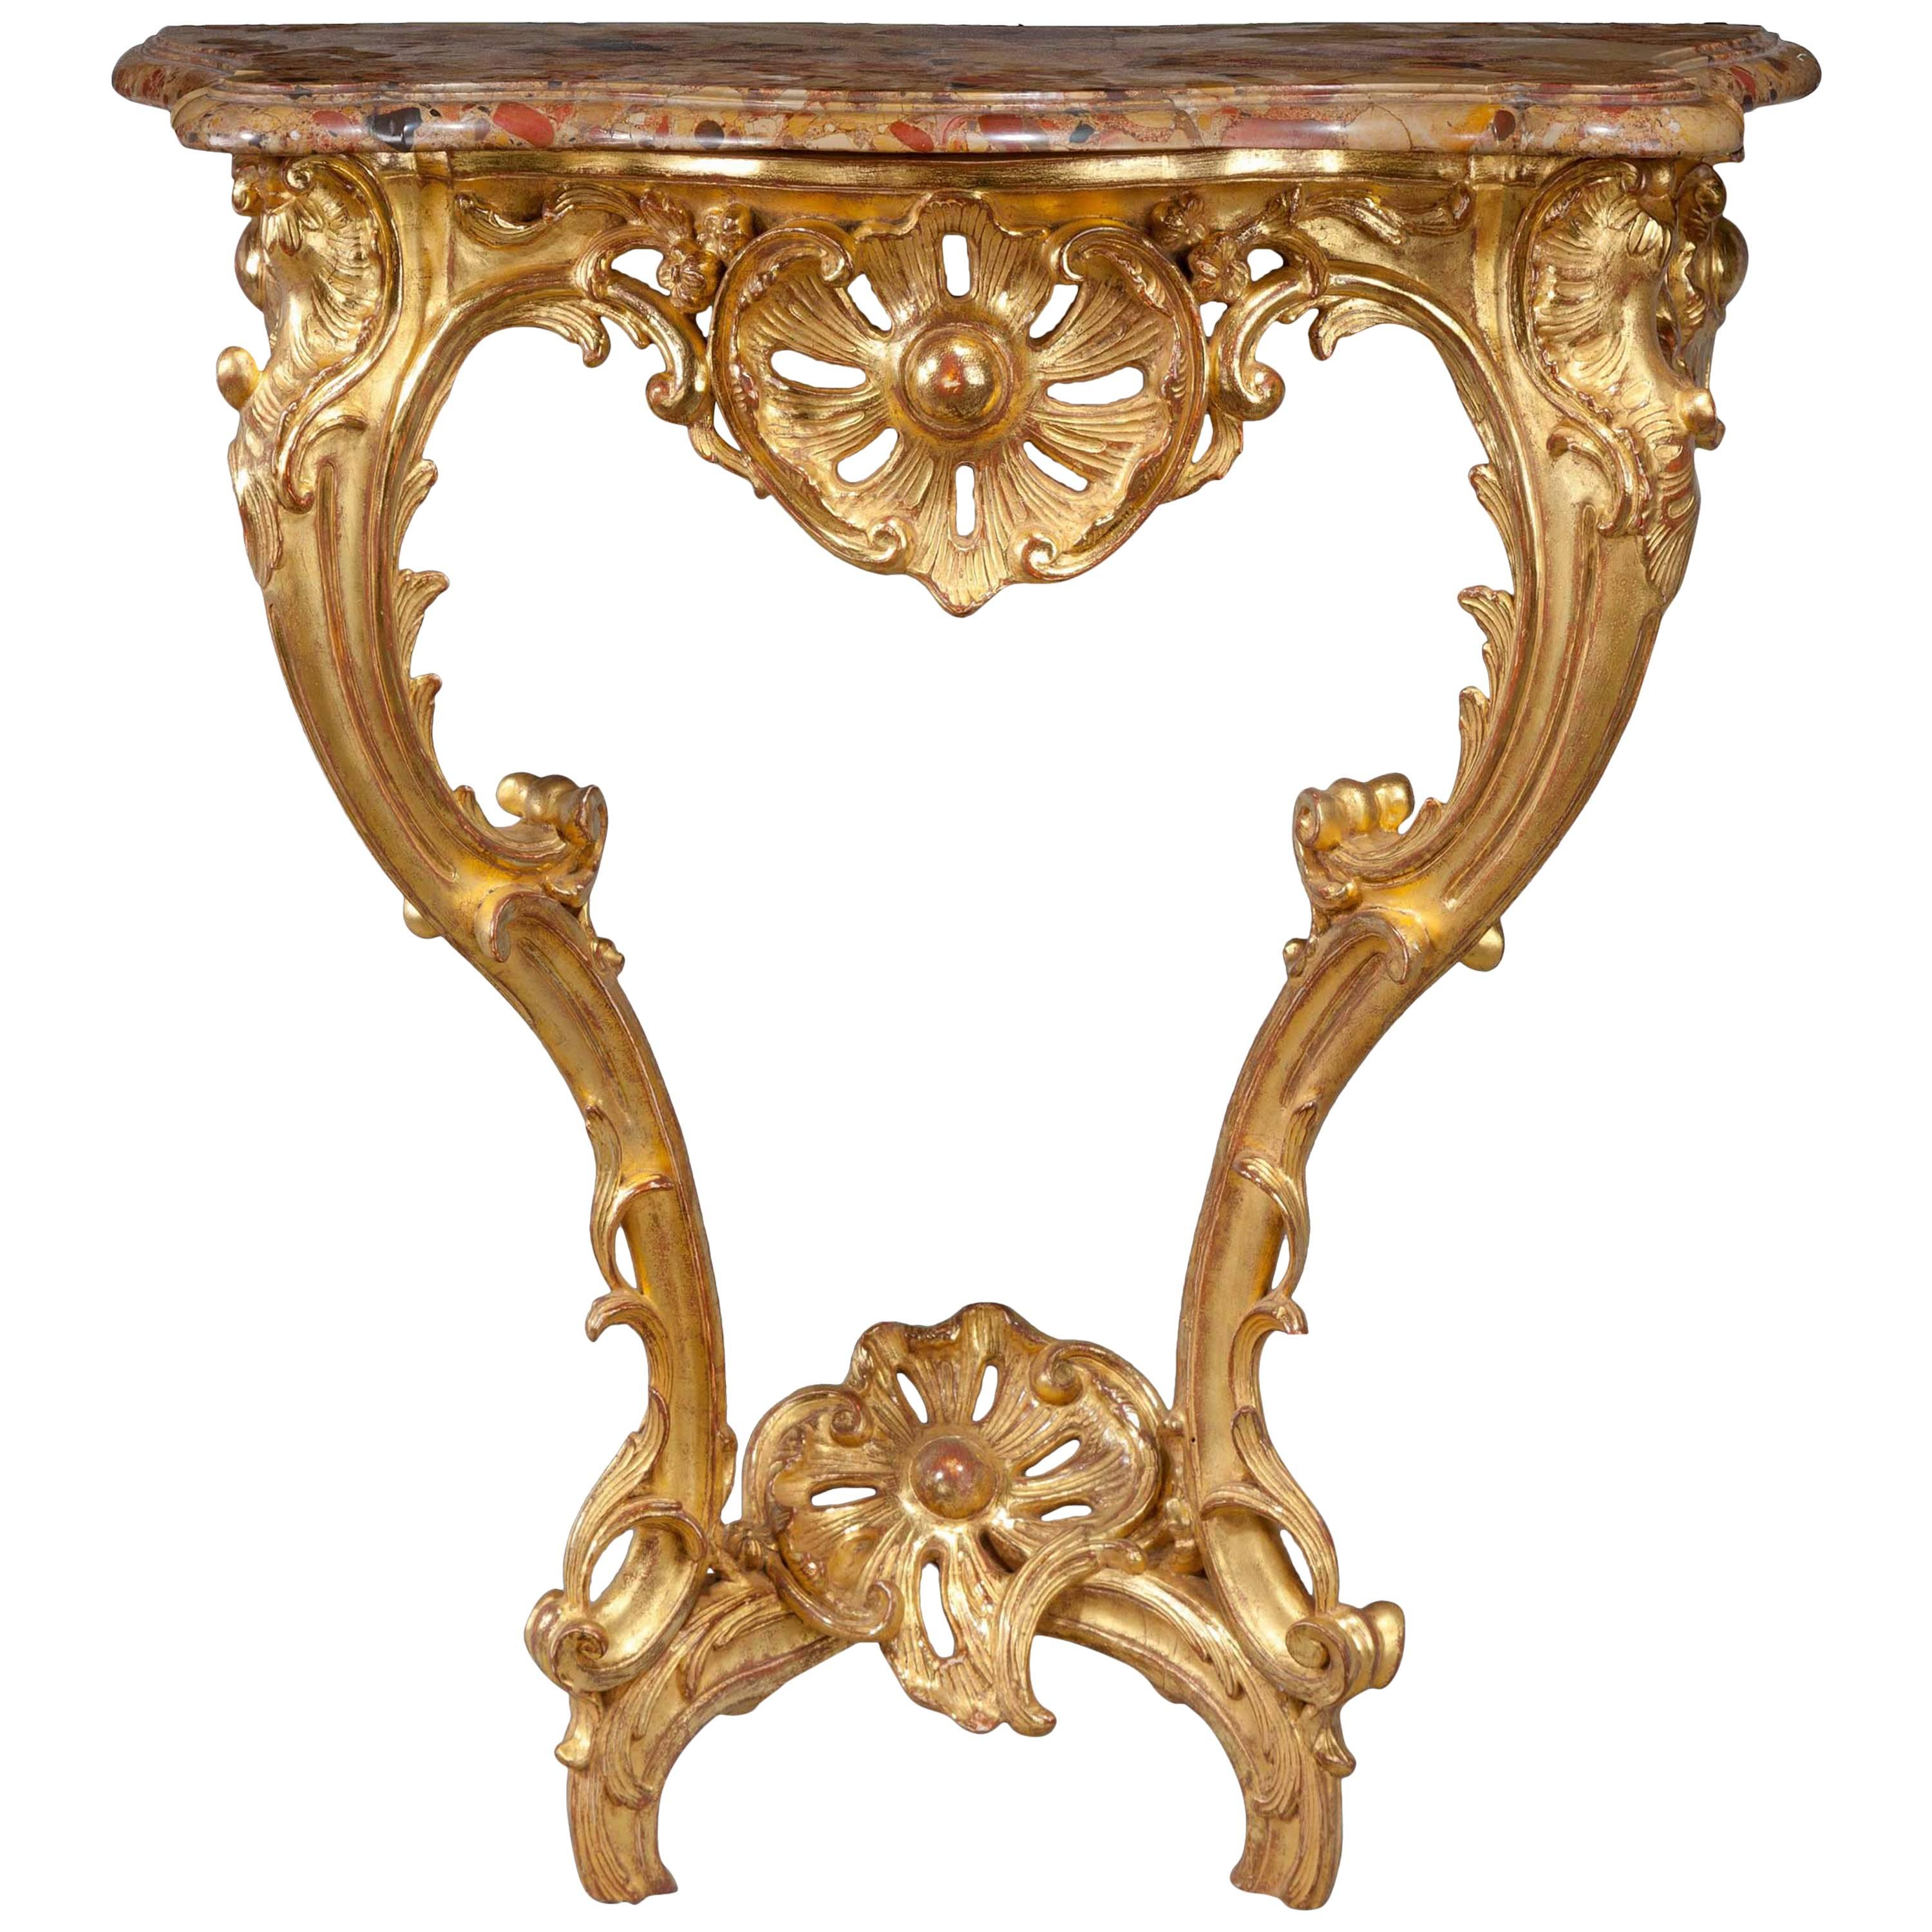 Louis XV Giltwood Console Table